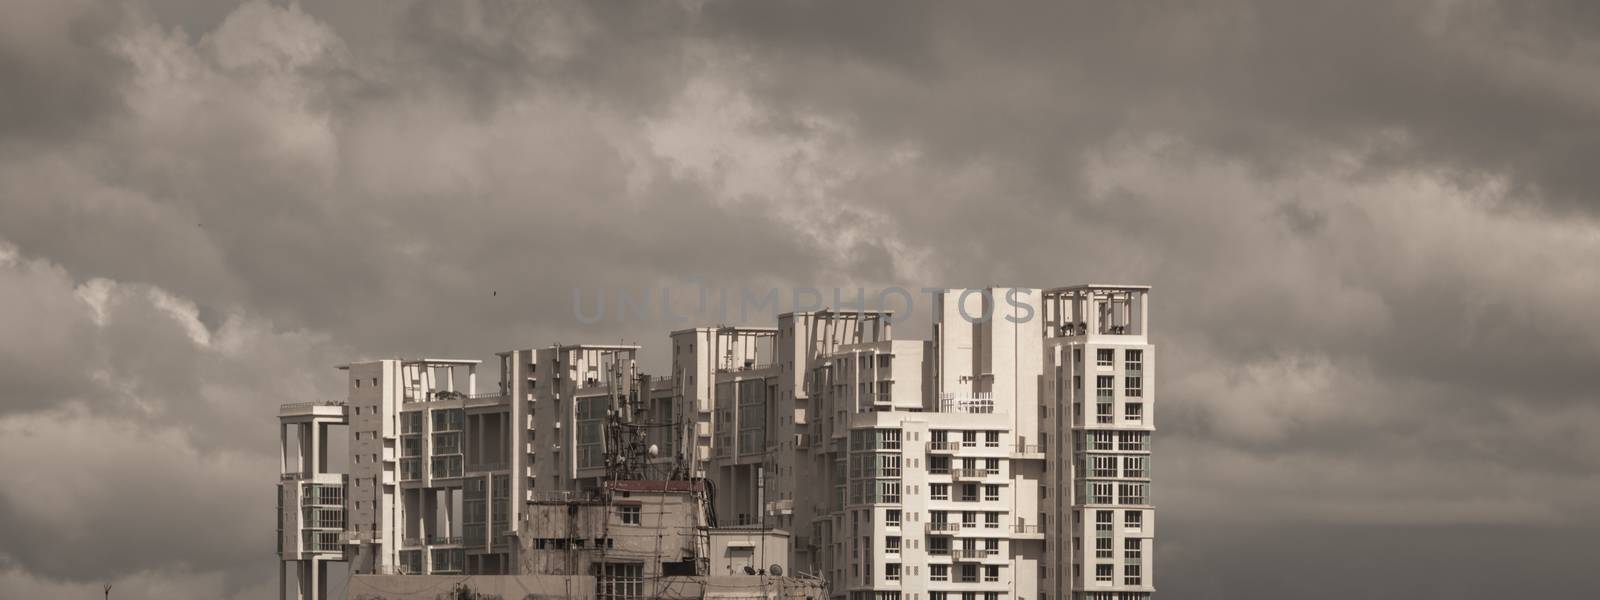 Delay Monsoon Rainy day city. Heavy Stormy rain clouds up above highrise. Storms and dark monsoons typical modern residential skyscrapers. Kolkata, Bengal India. A landscape nature Photography.